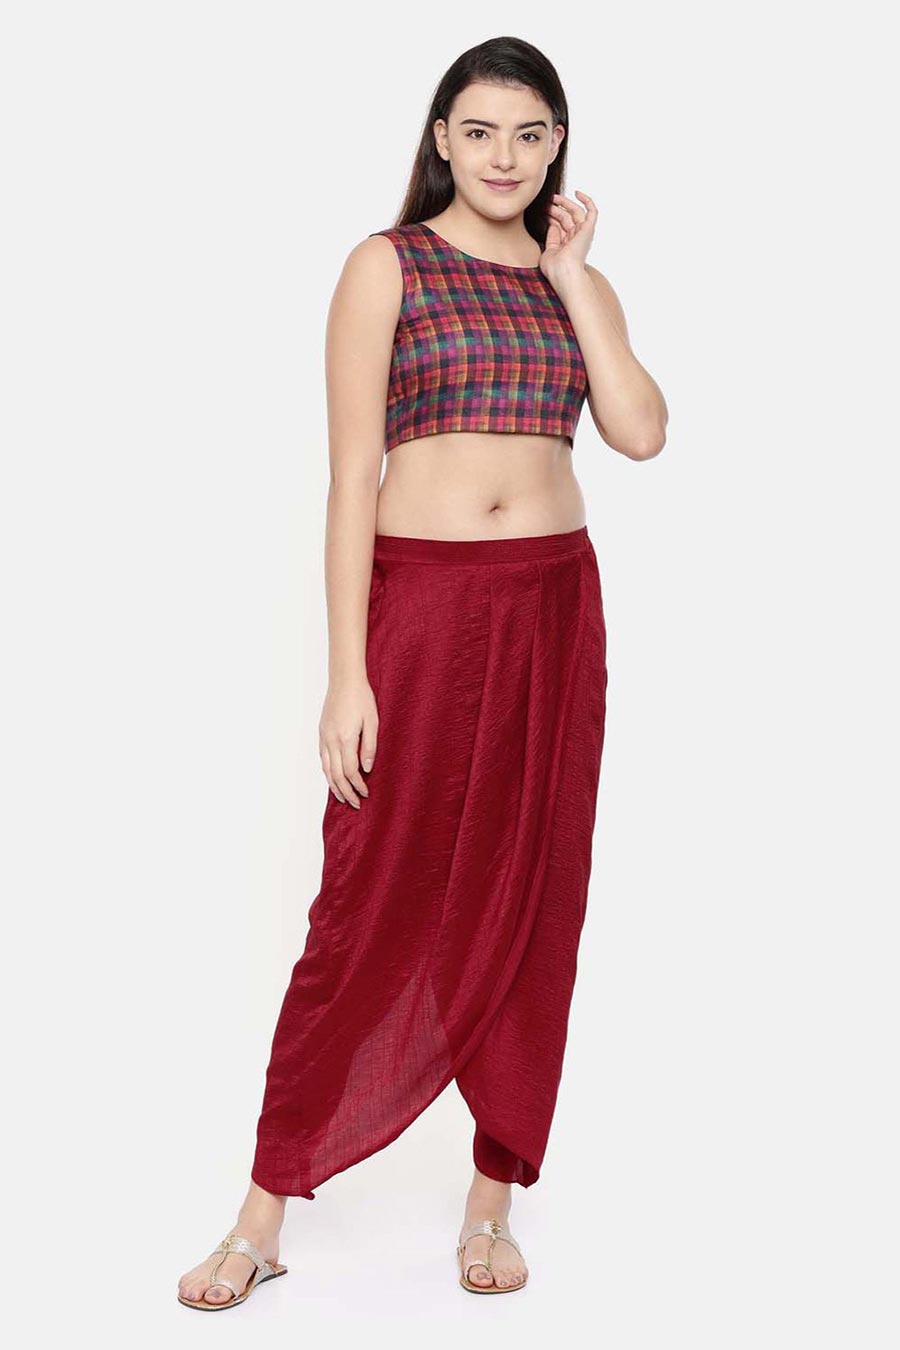 Red peplum top with dhoti pants - set of two by Twisha | The Secret Label